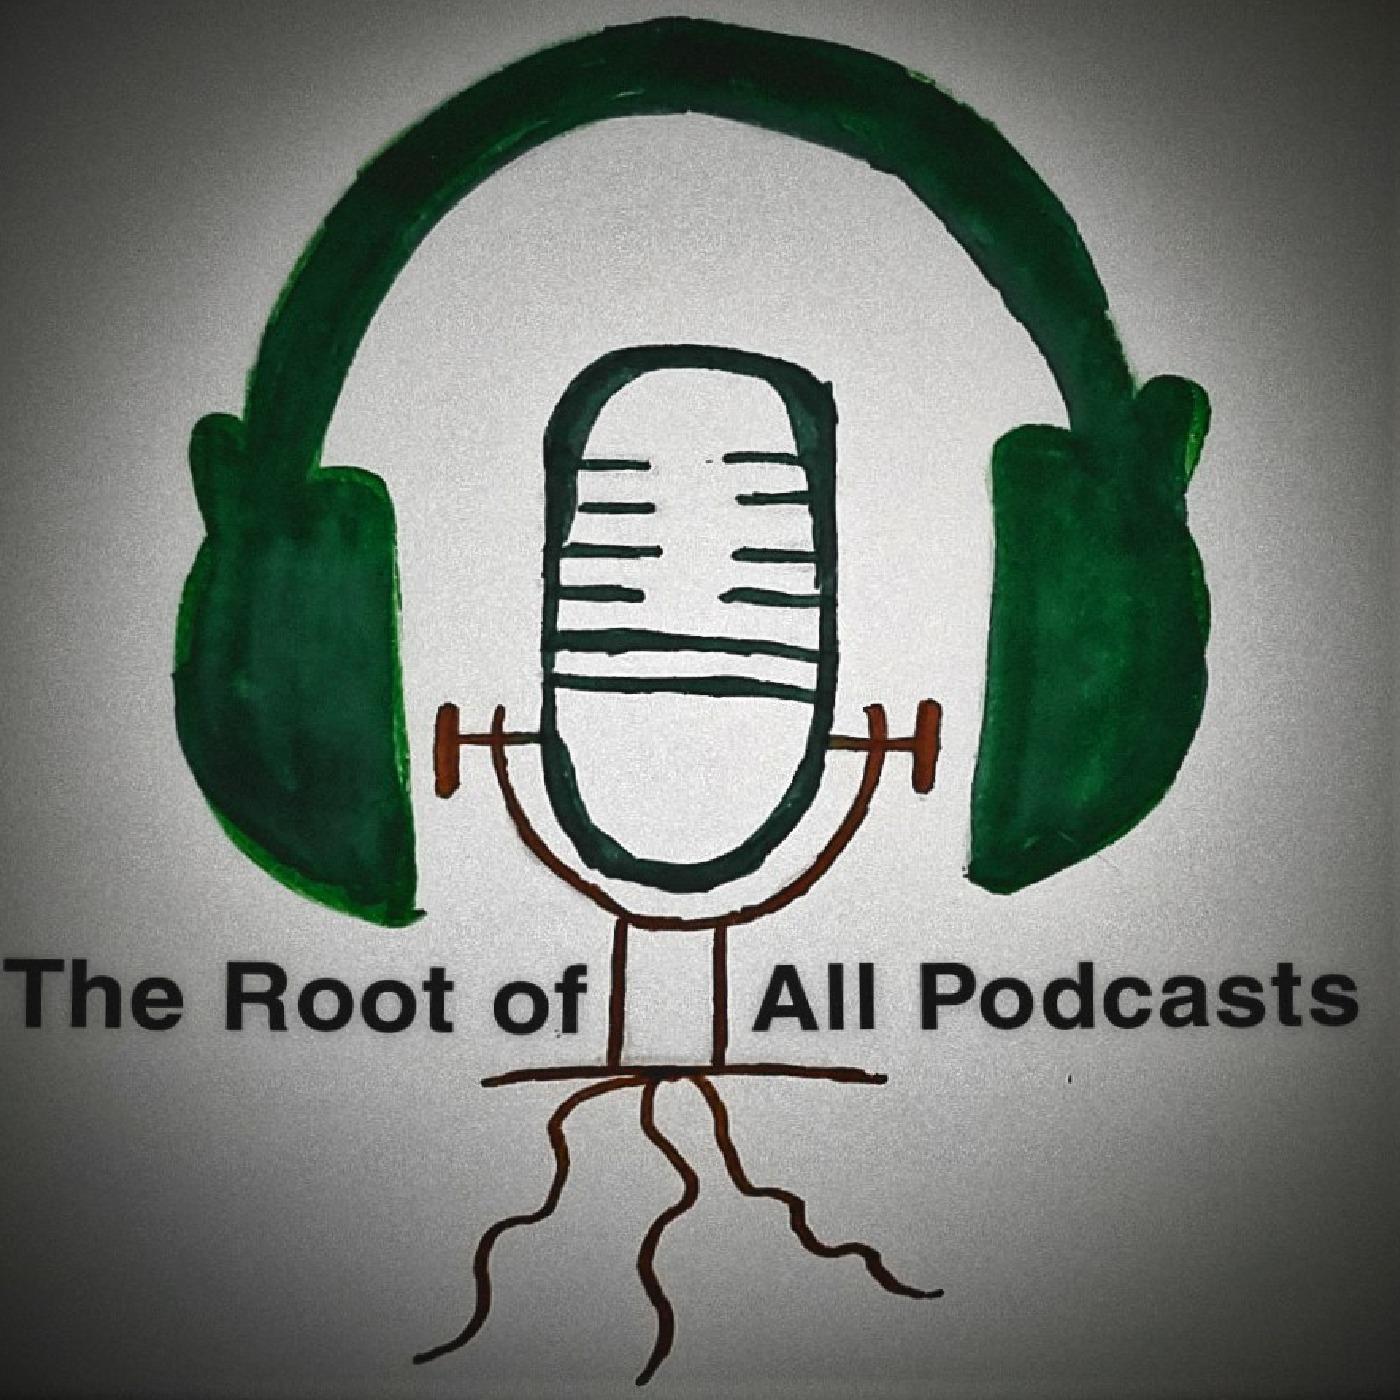 The Root of All Podcasts